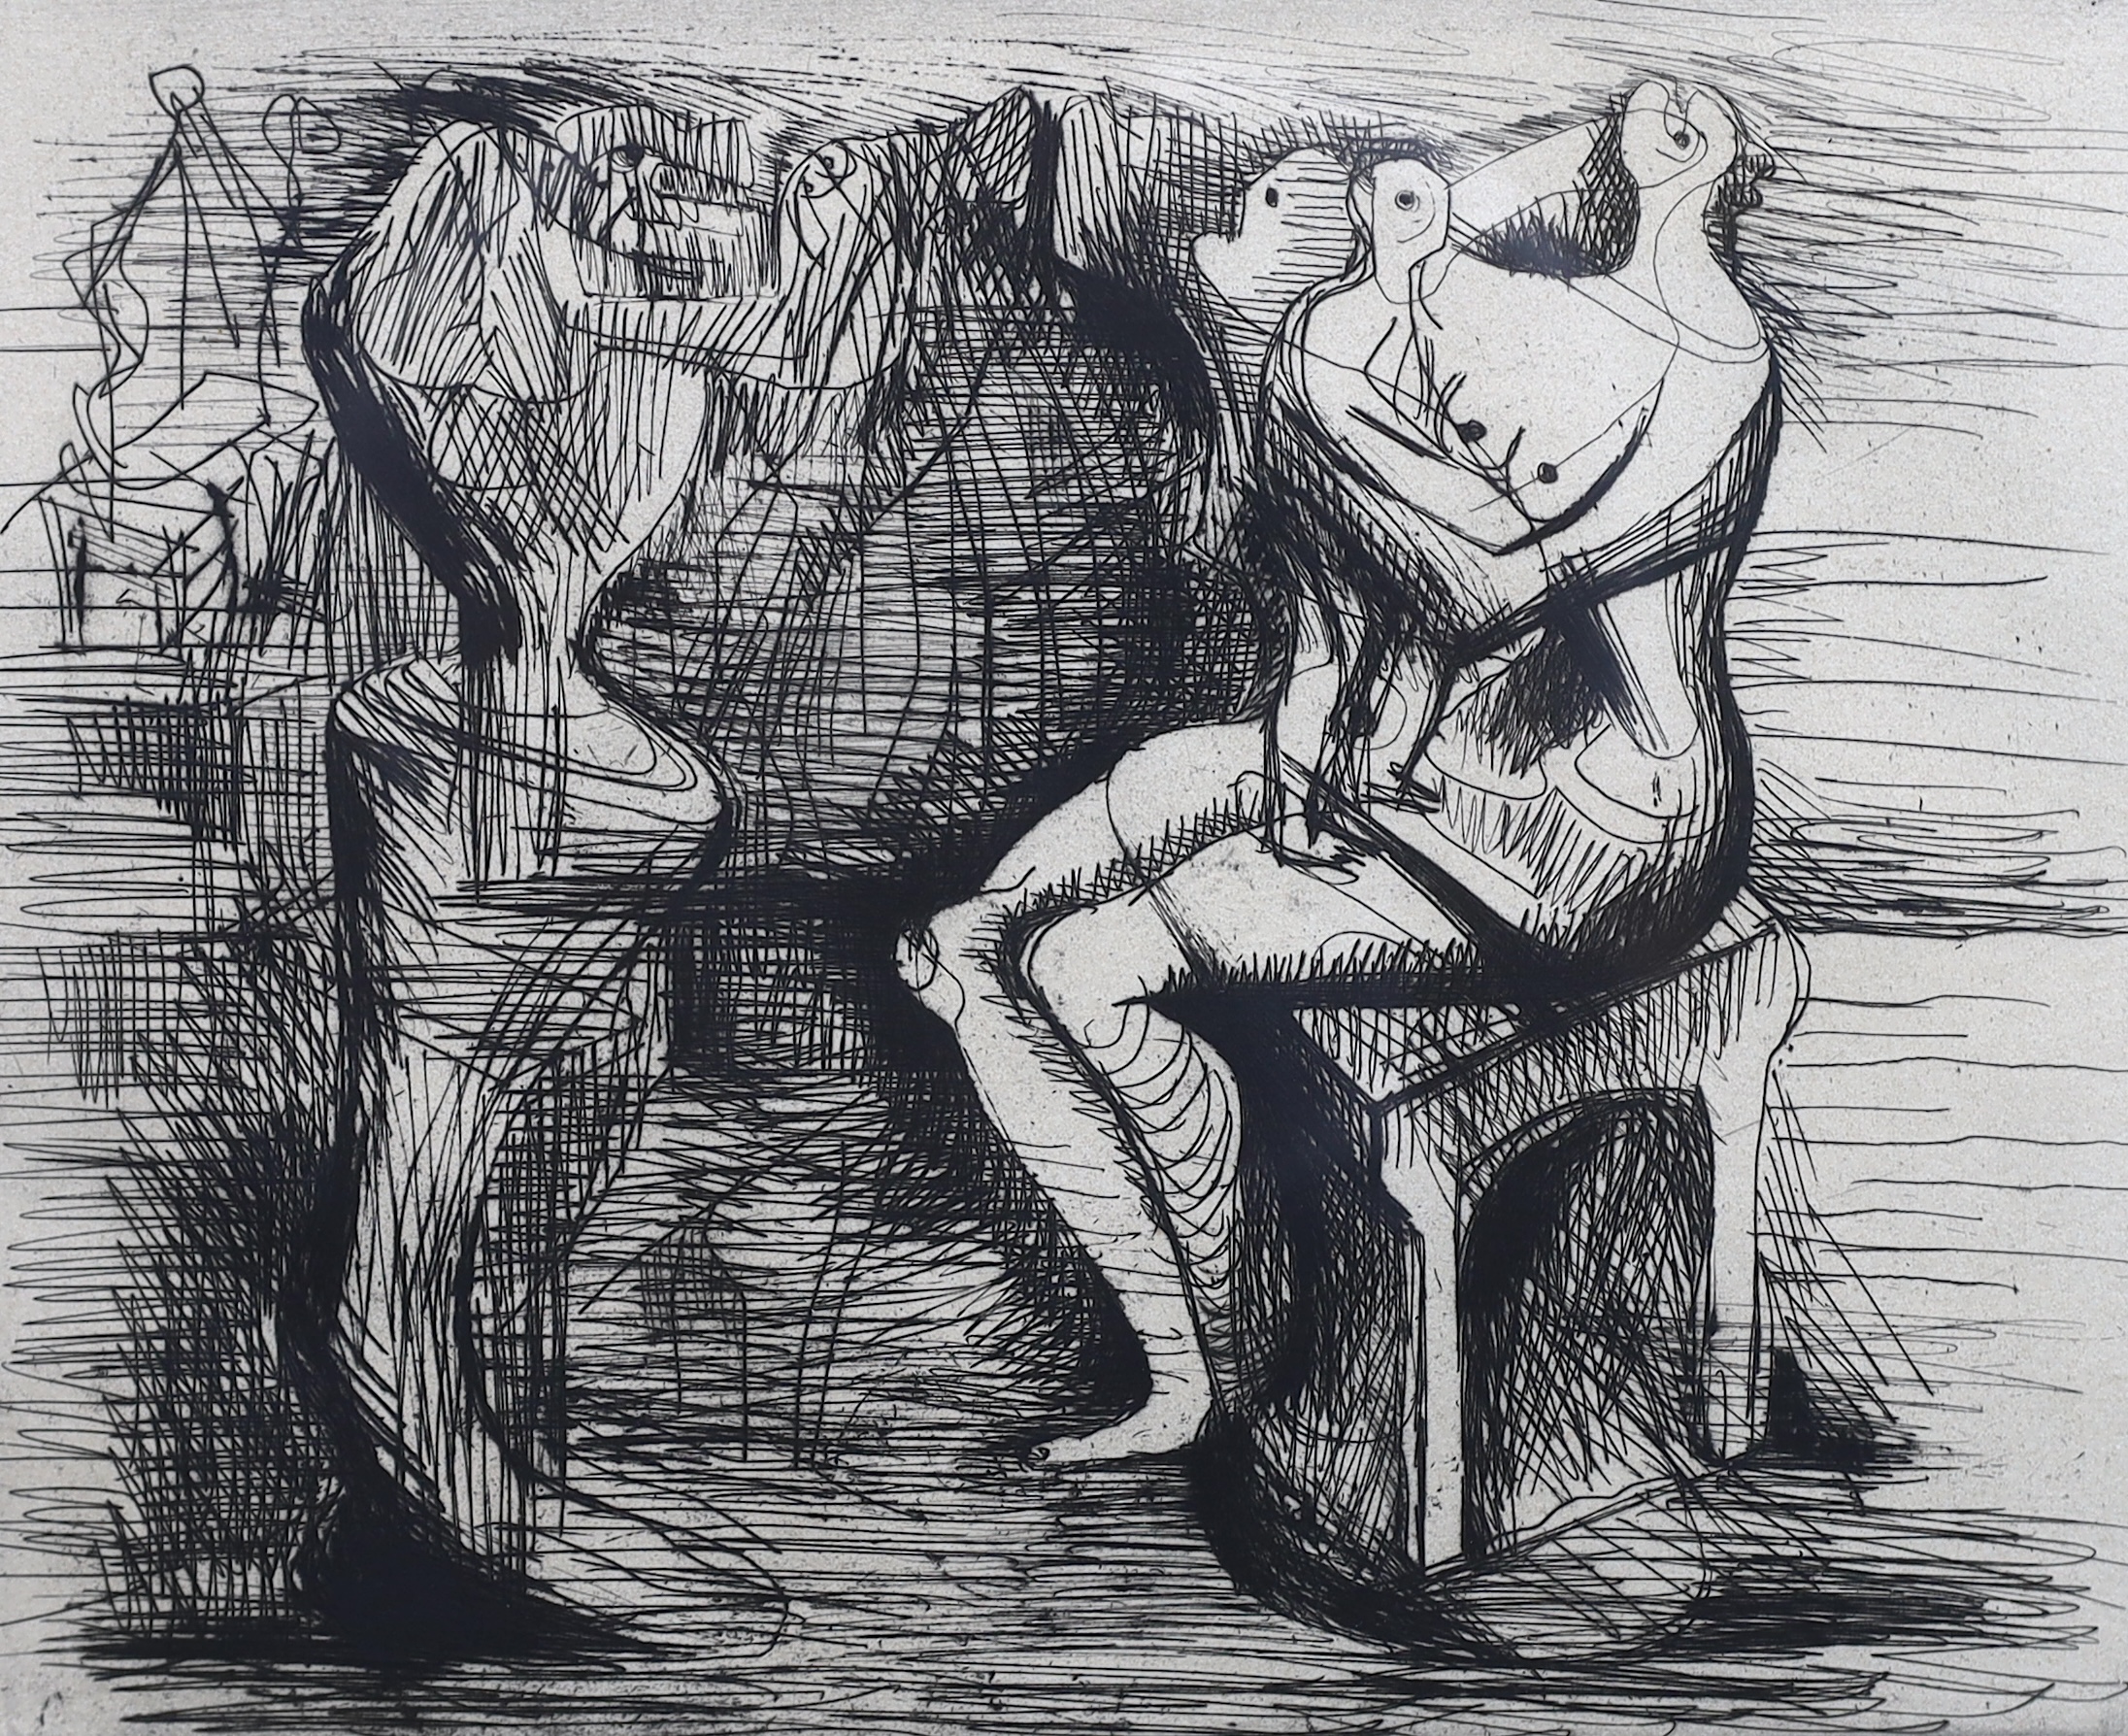 Henry Moore (English, 1898-1986), Seated mother and child, etching and drypoint on cream wove paper, 1966, 22.5 x 27cm